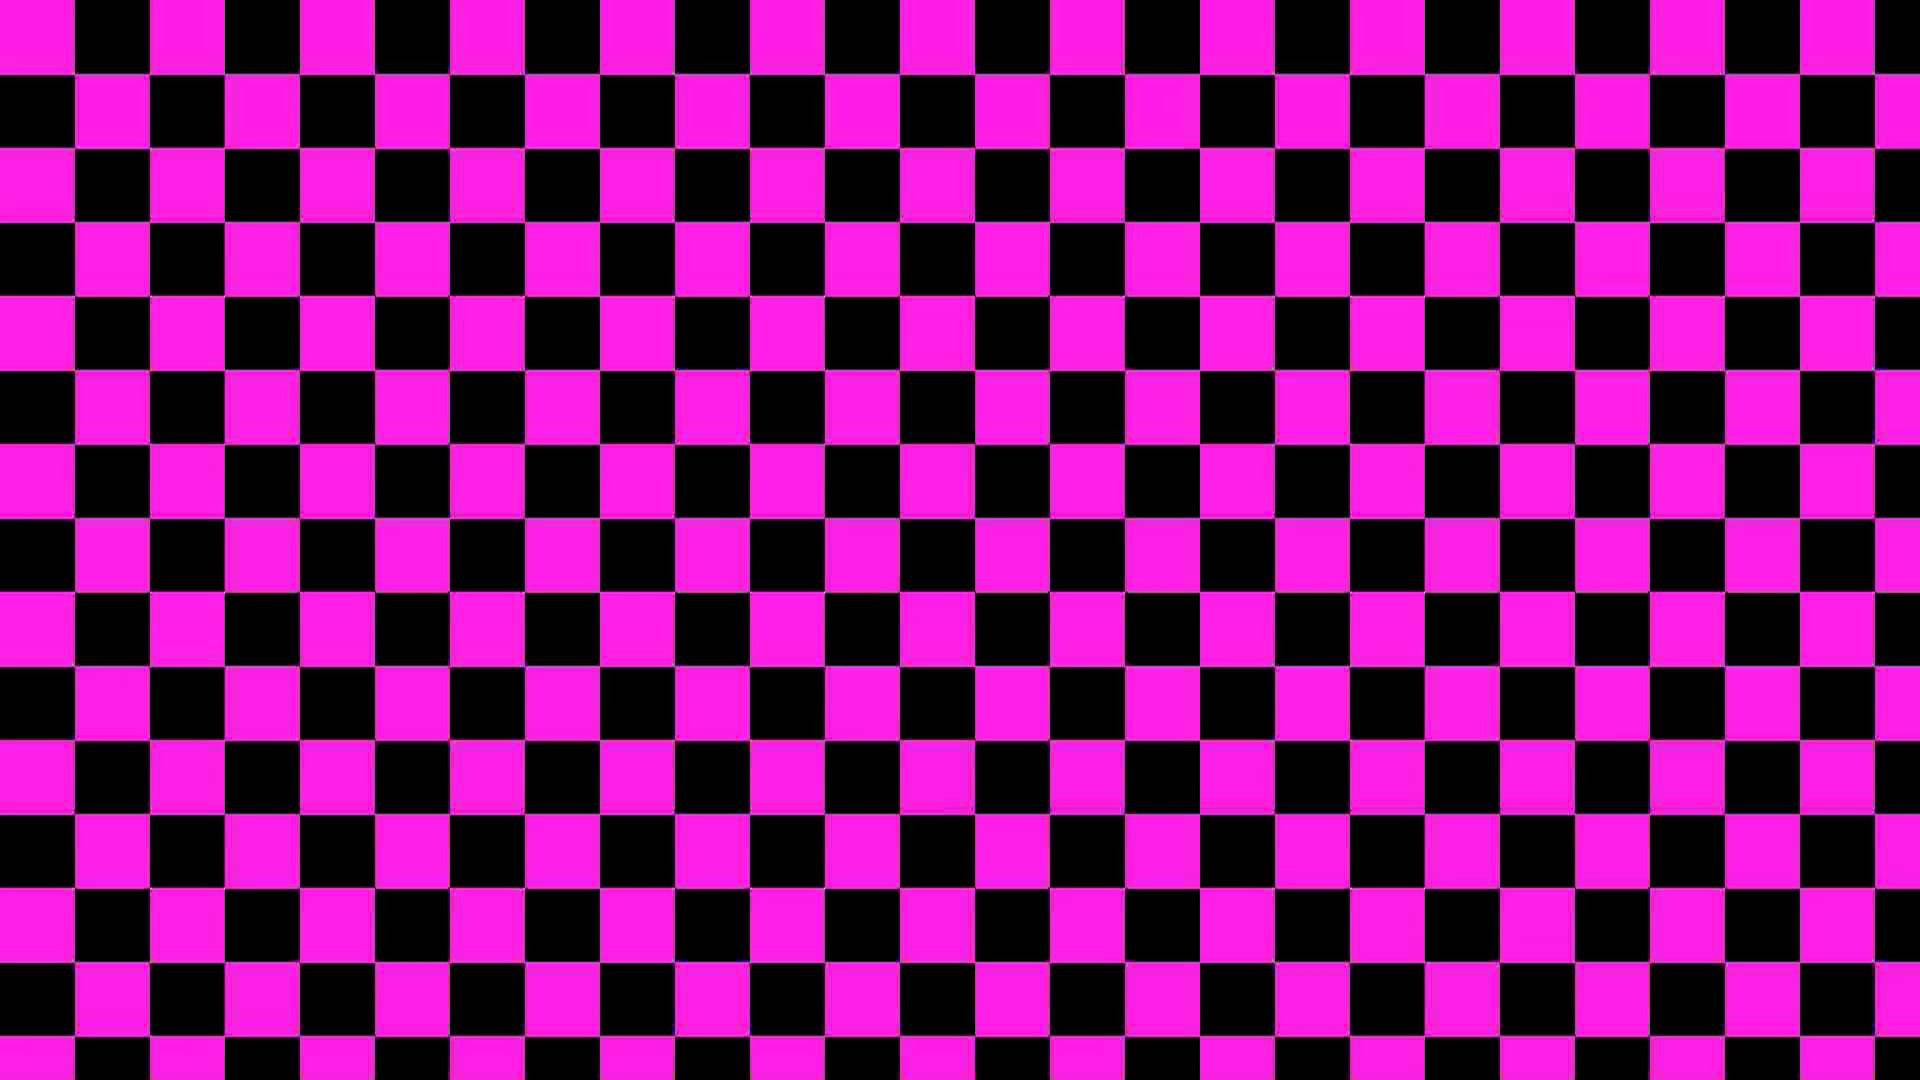 1920x1080 Pink Checkered Wallpaper Lovely Black and Pink Checkered Background